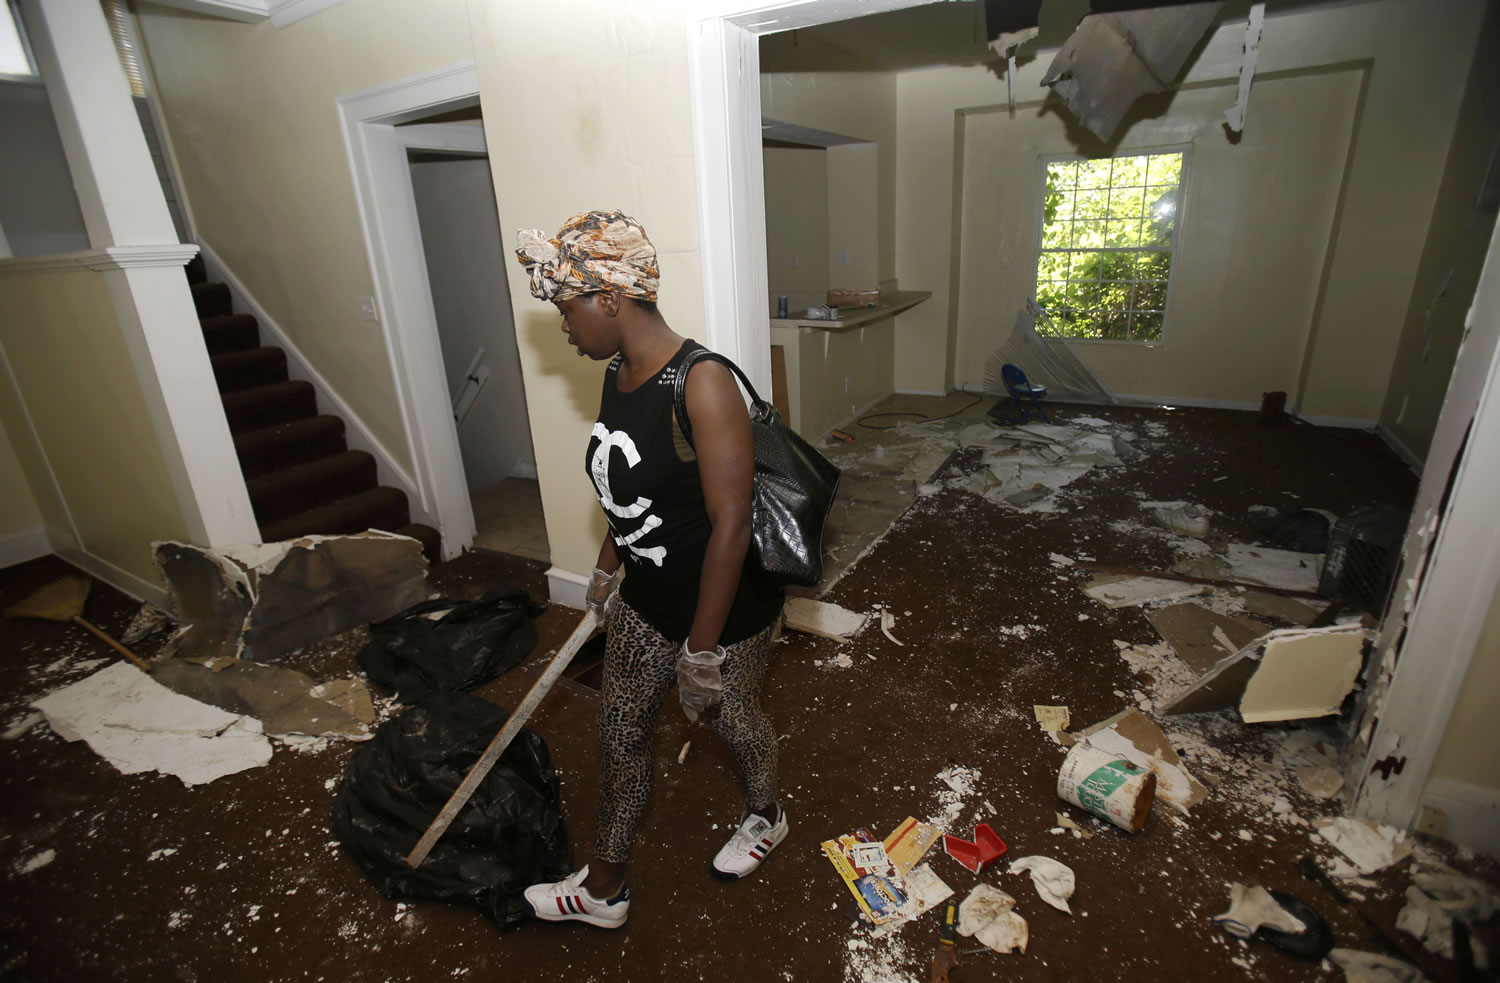 Sanautica Hicks-Ross, 18, searches an abandoned home Sunday near where three bodies were found in East Cleveland, Ohio. Hicks-Ross is an East Cleveland resident.